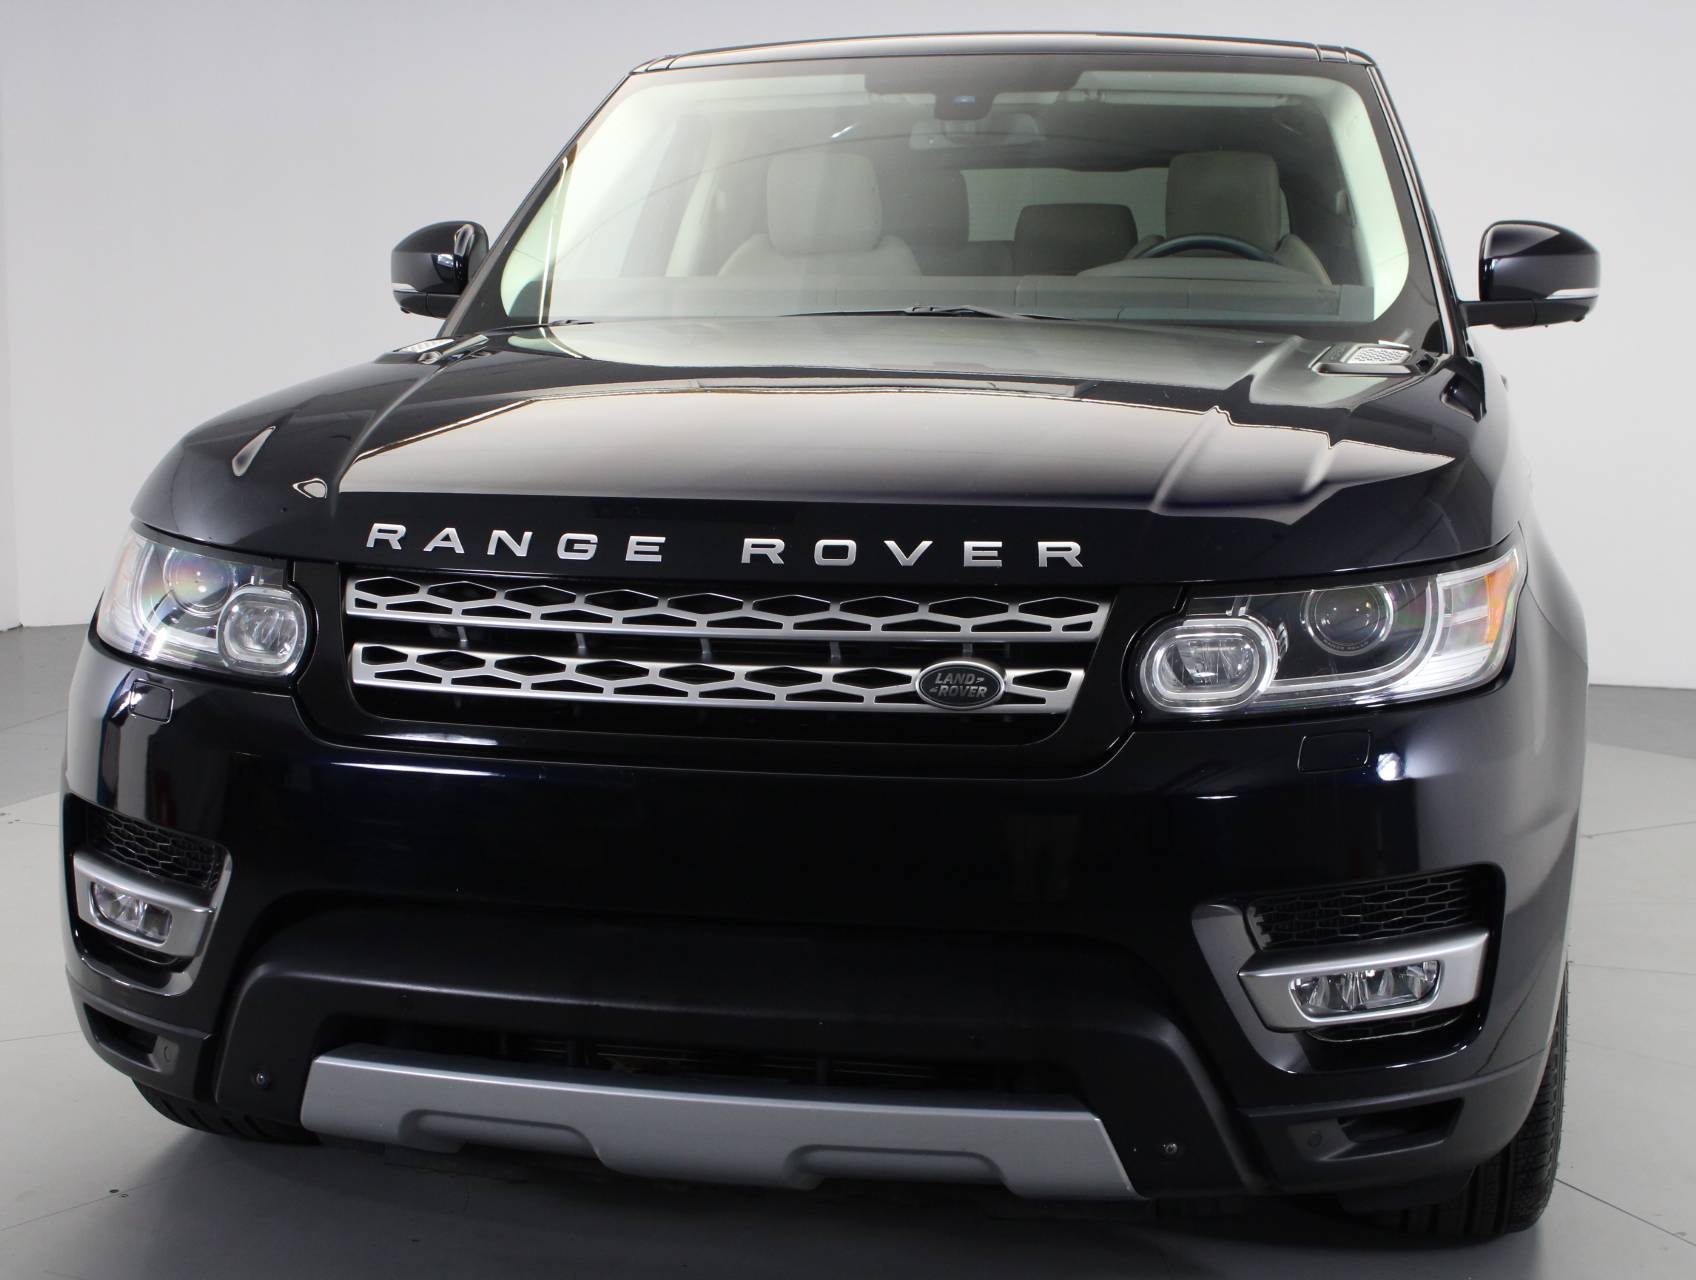 Florida Fine Cars - Used LAND ROVER RANGE ROVER SPORT 2015 WEST PALM Supercharged Hse